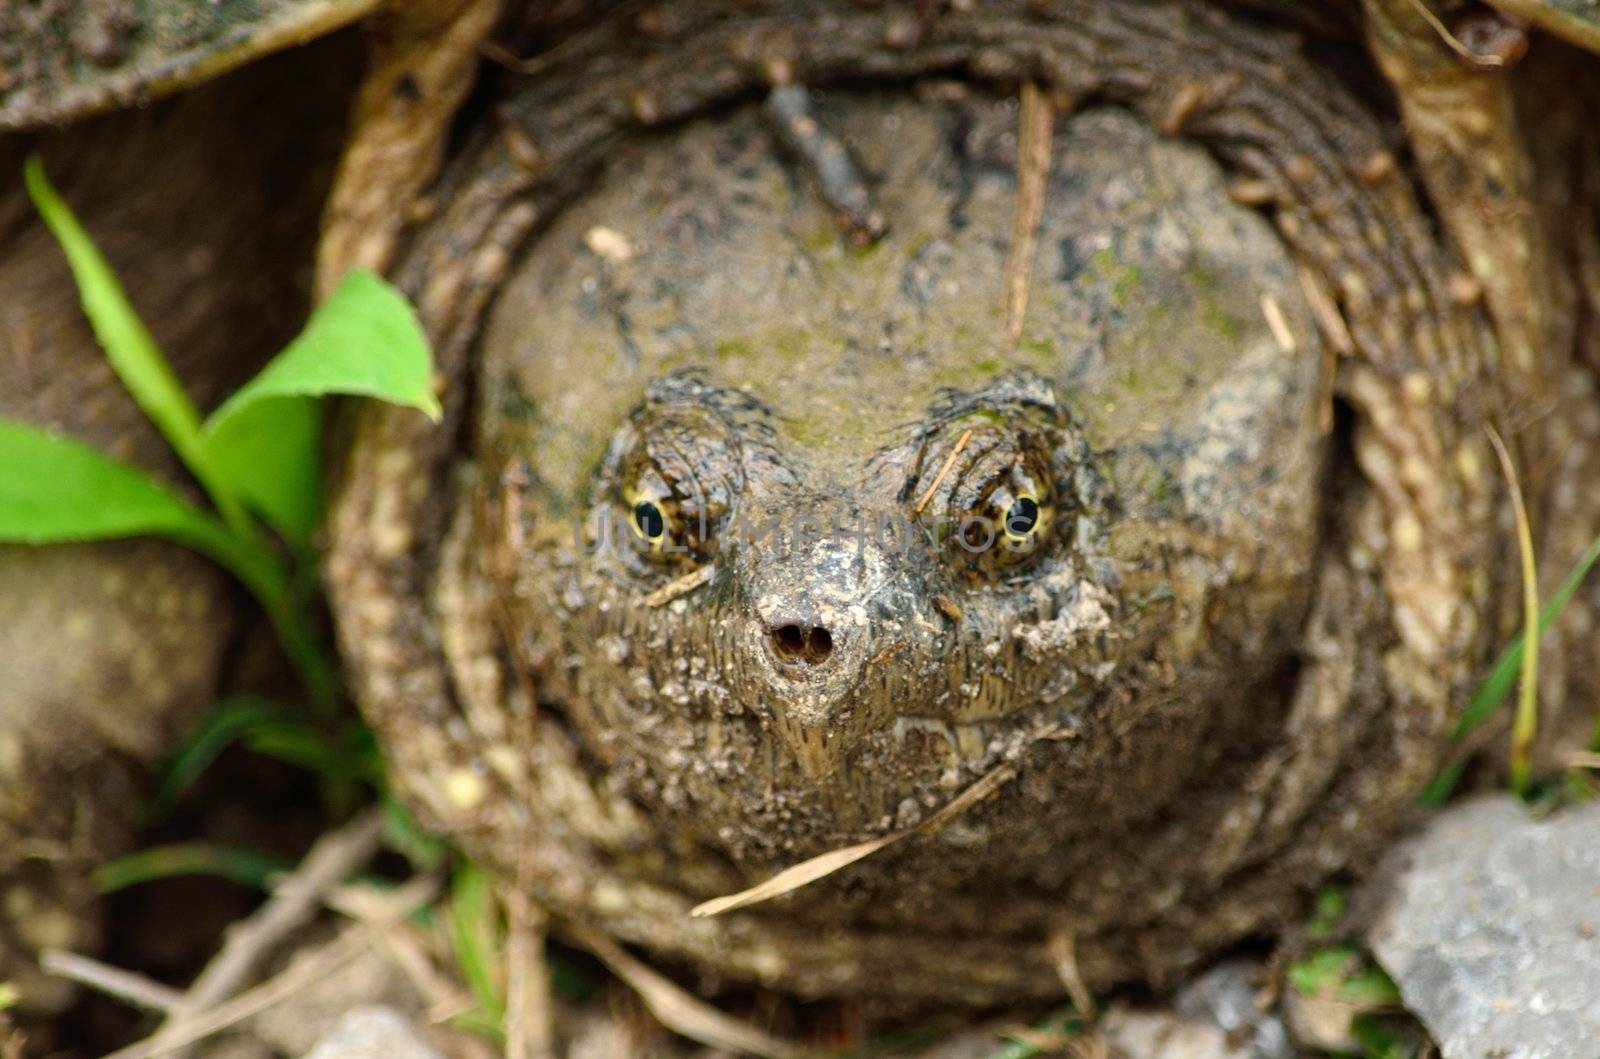 Closeup head shot of a Snapping Turtle.